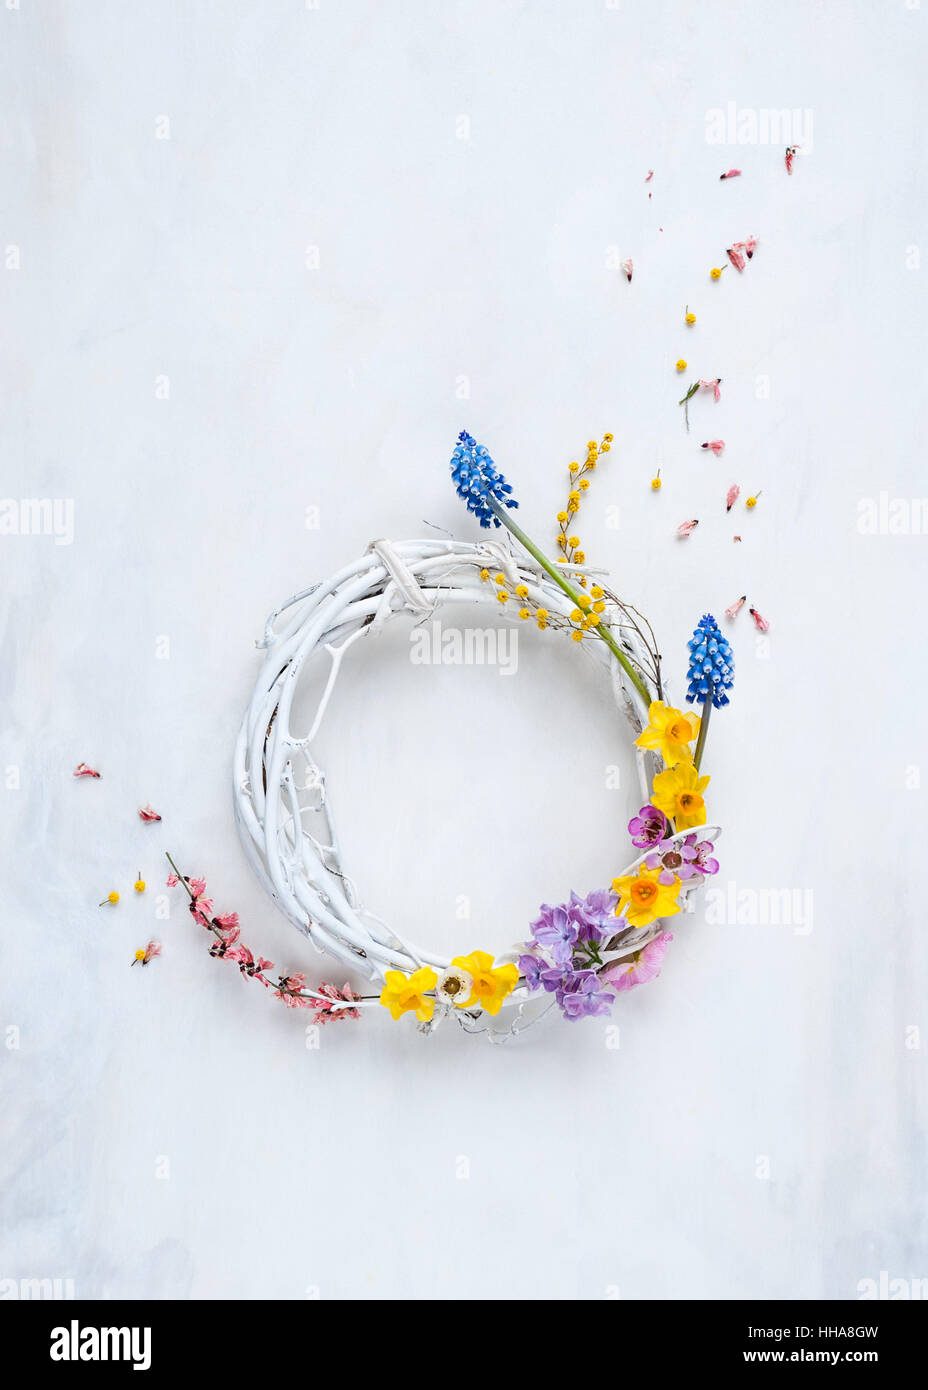 white willow wr eath with spring flowers Stock Photo